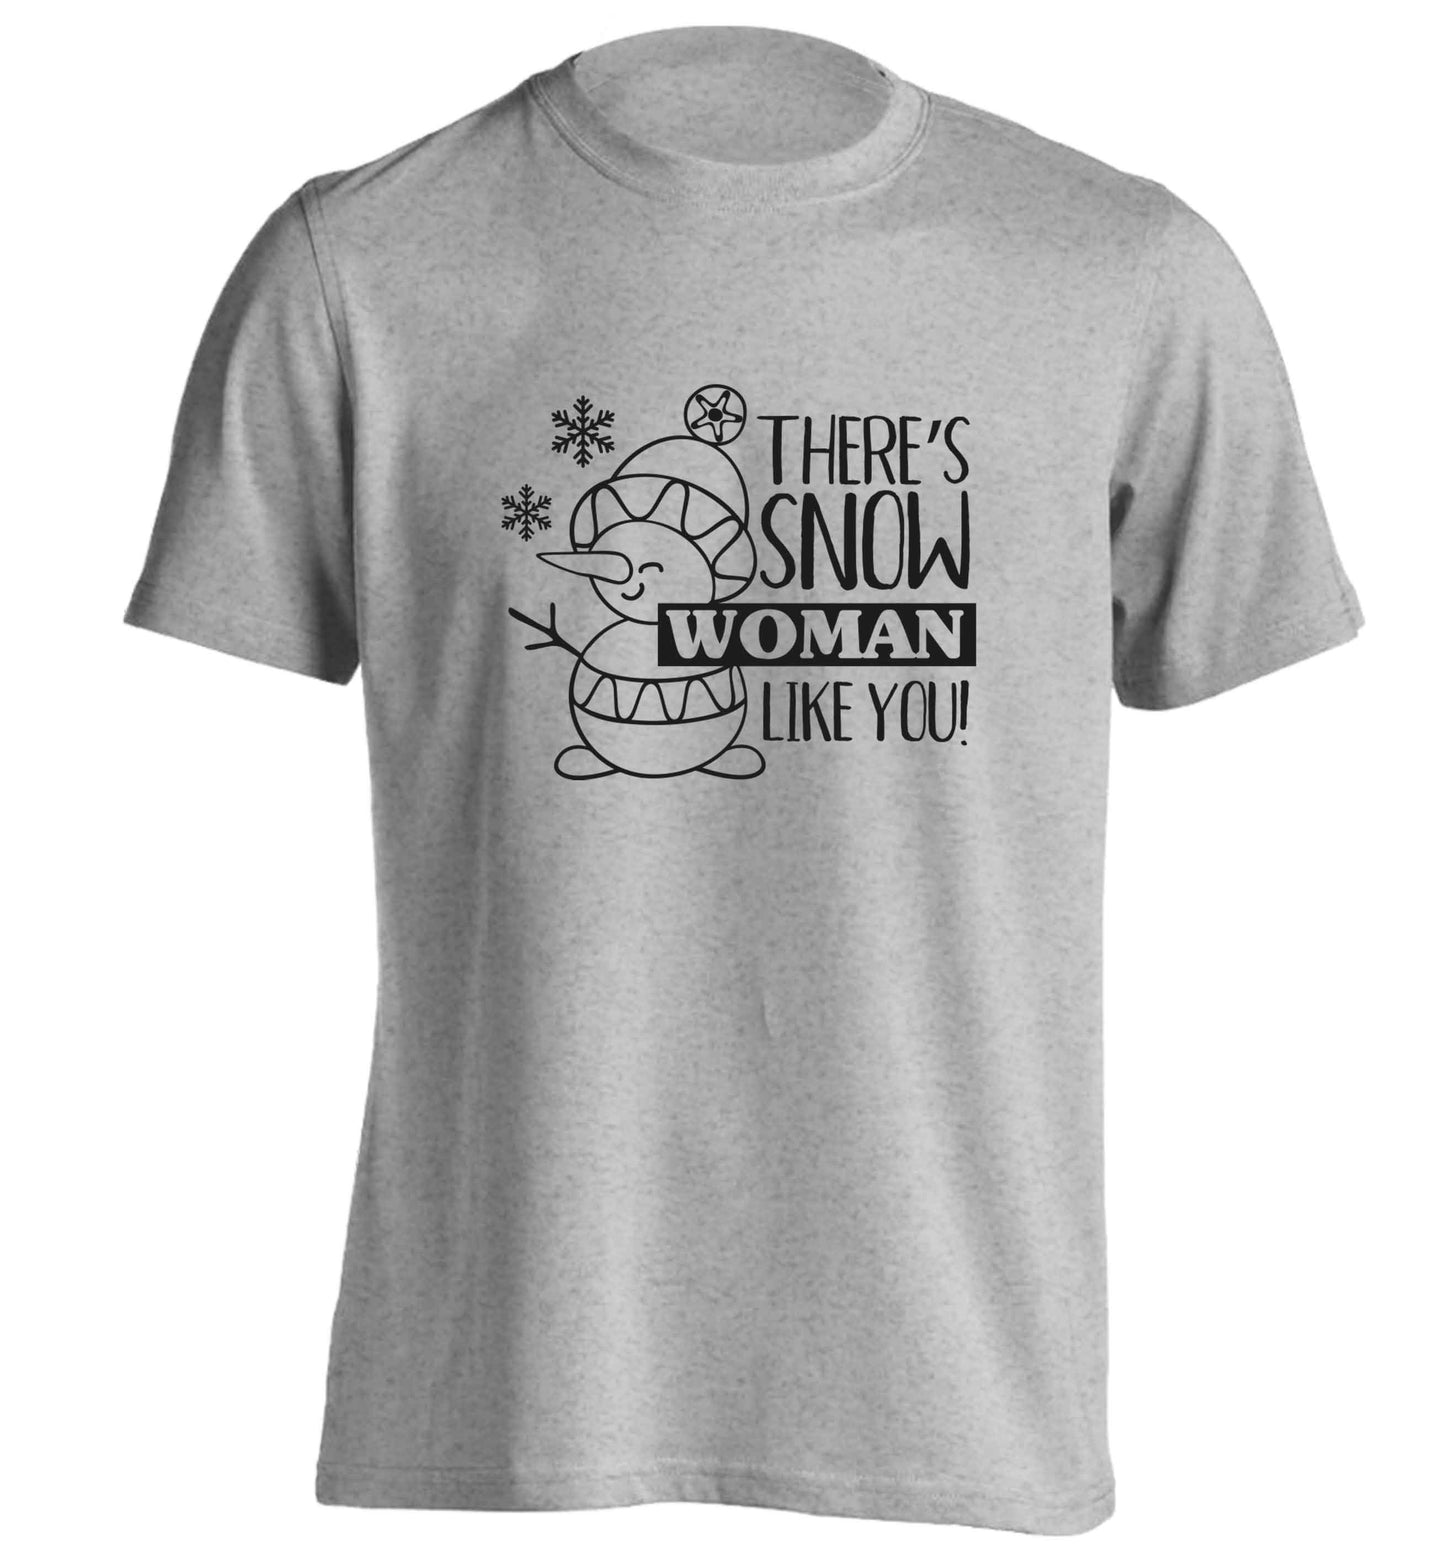 There's snow woman like you adults unisex grey Tshirt 2XL